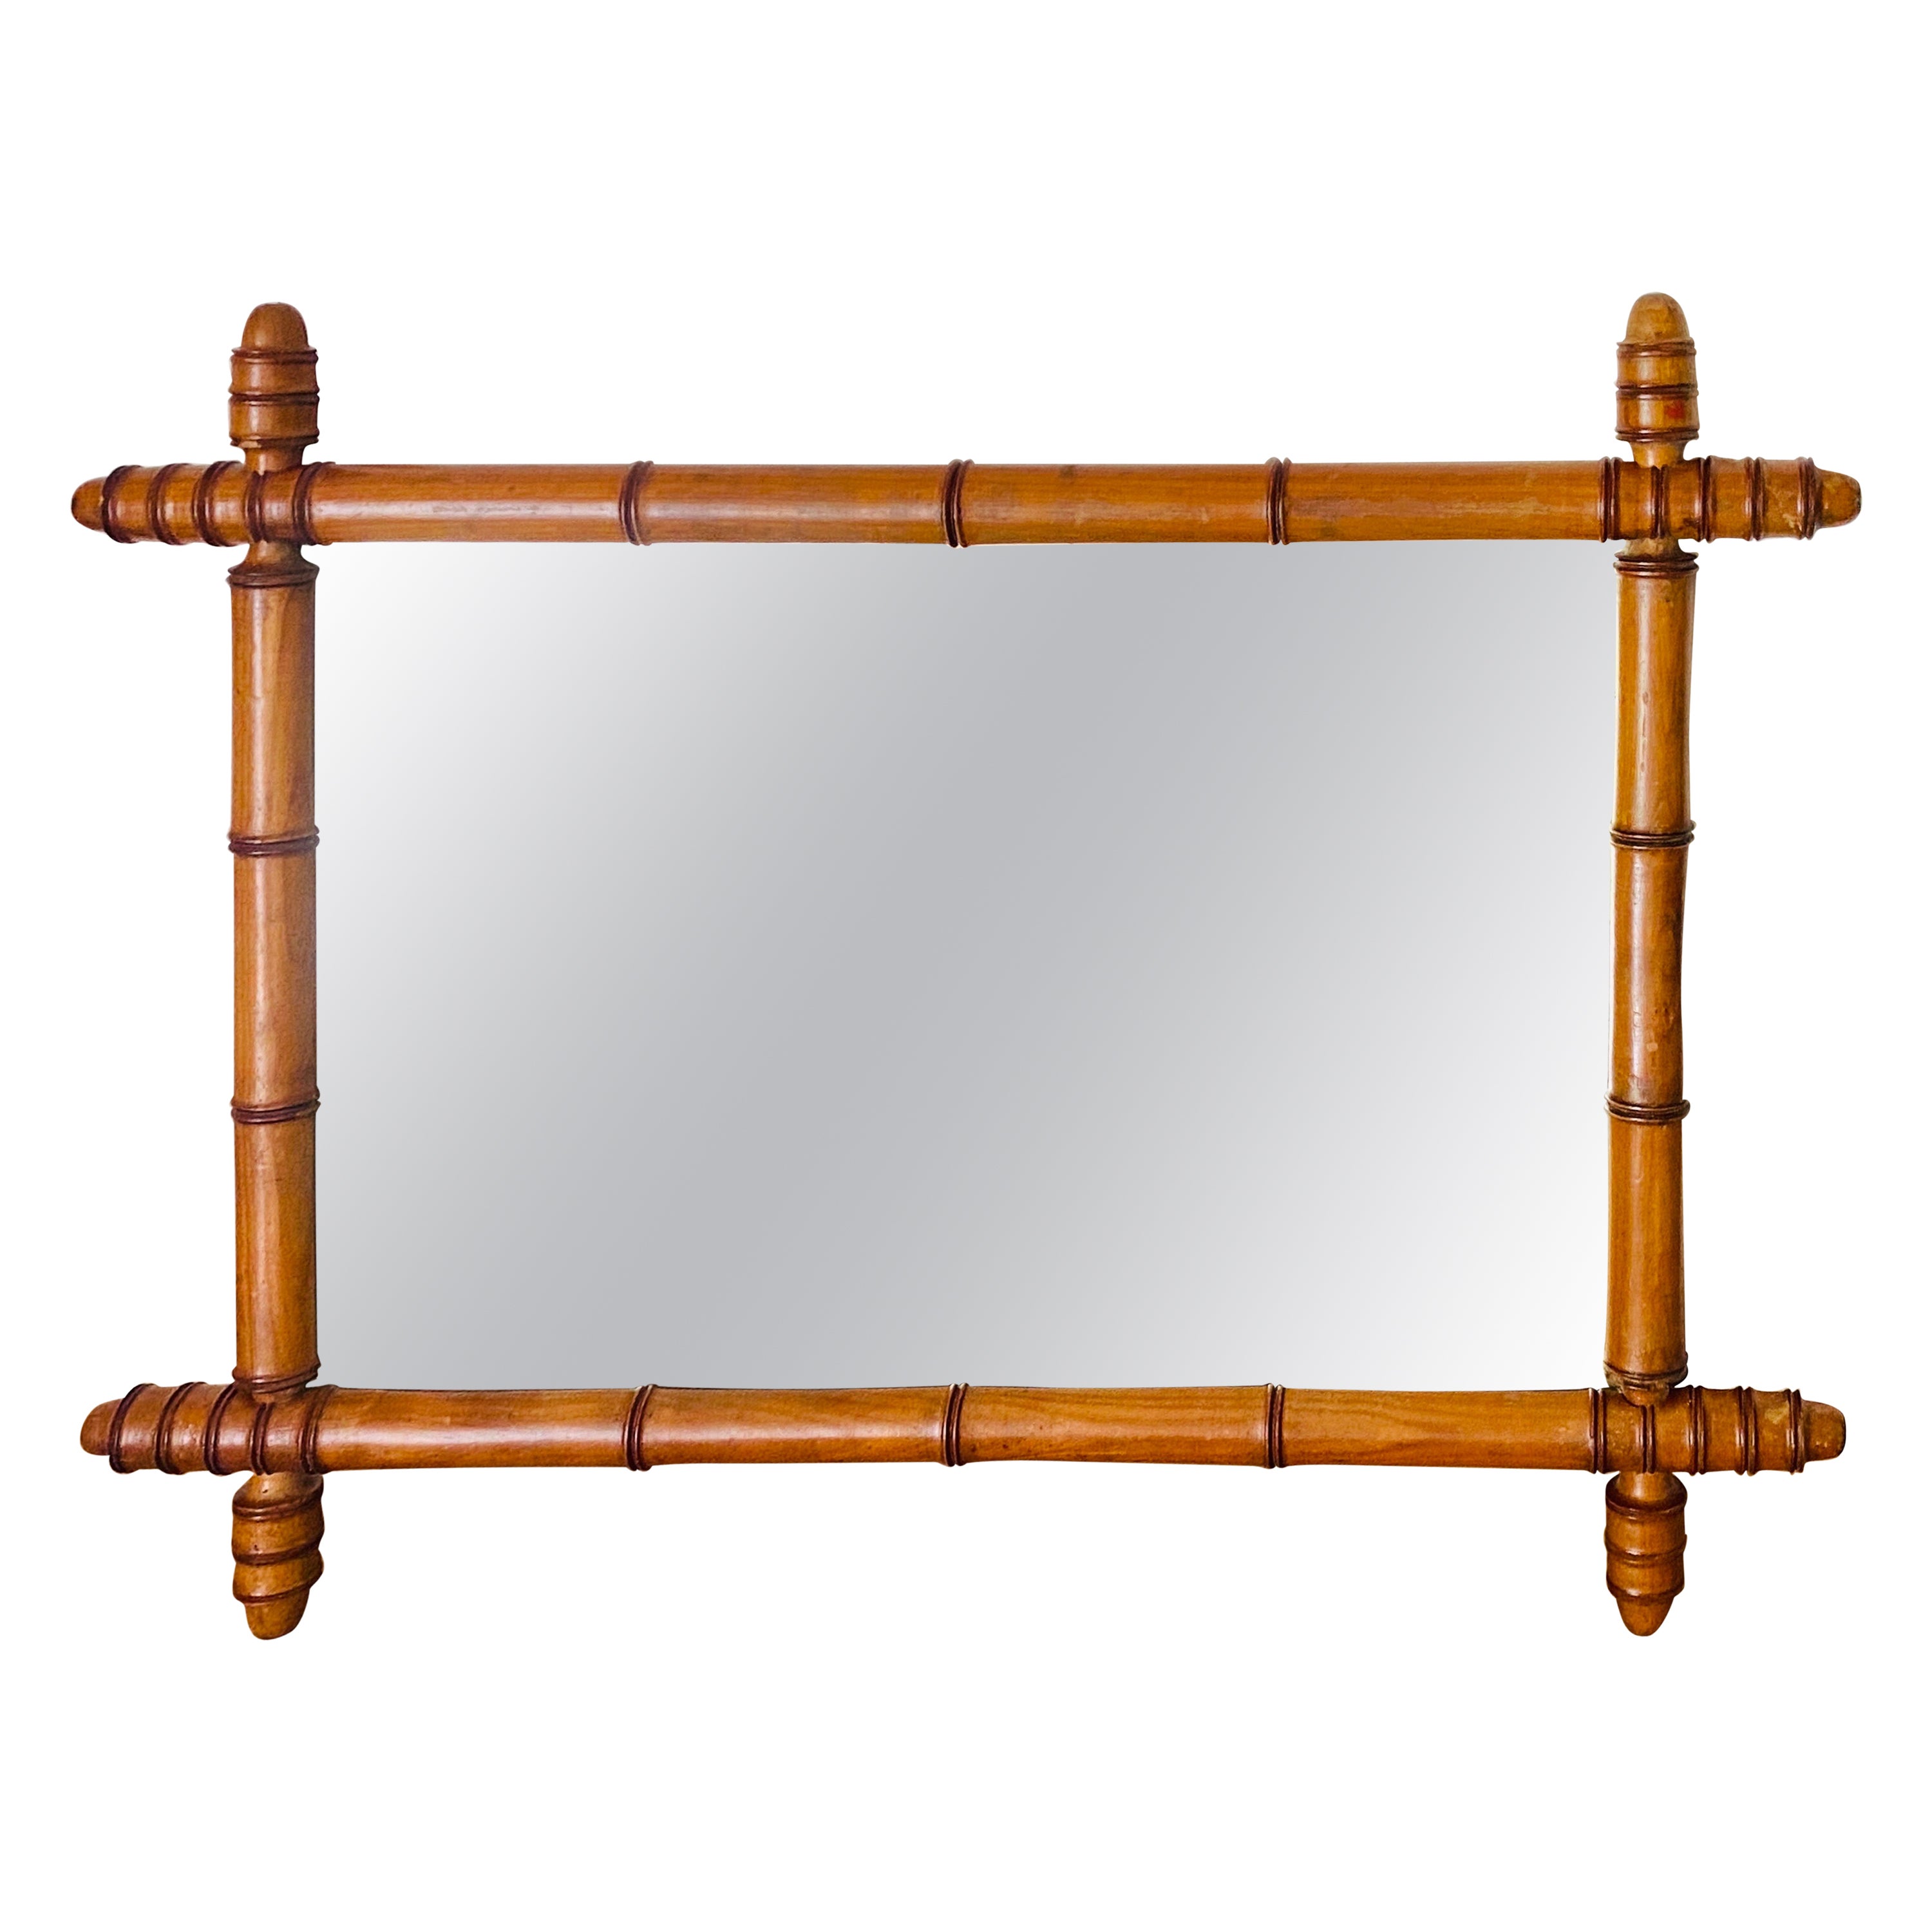 Faux Bamboo Mirror Medium Size, Brown Color France, circa 1940 Great Old Patina For Sale